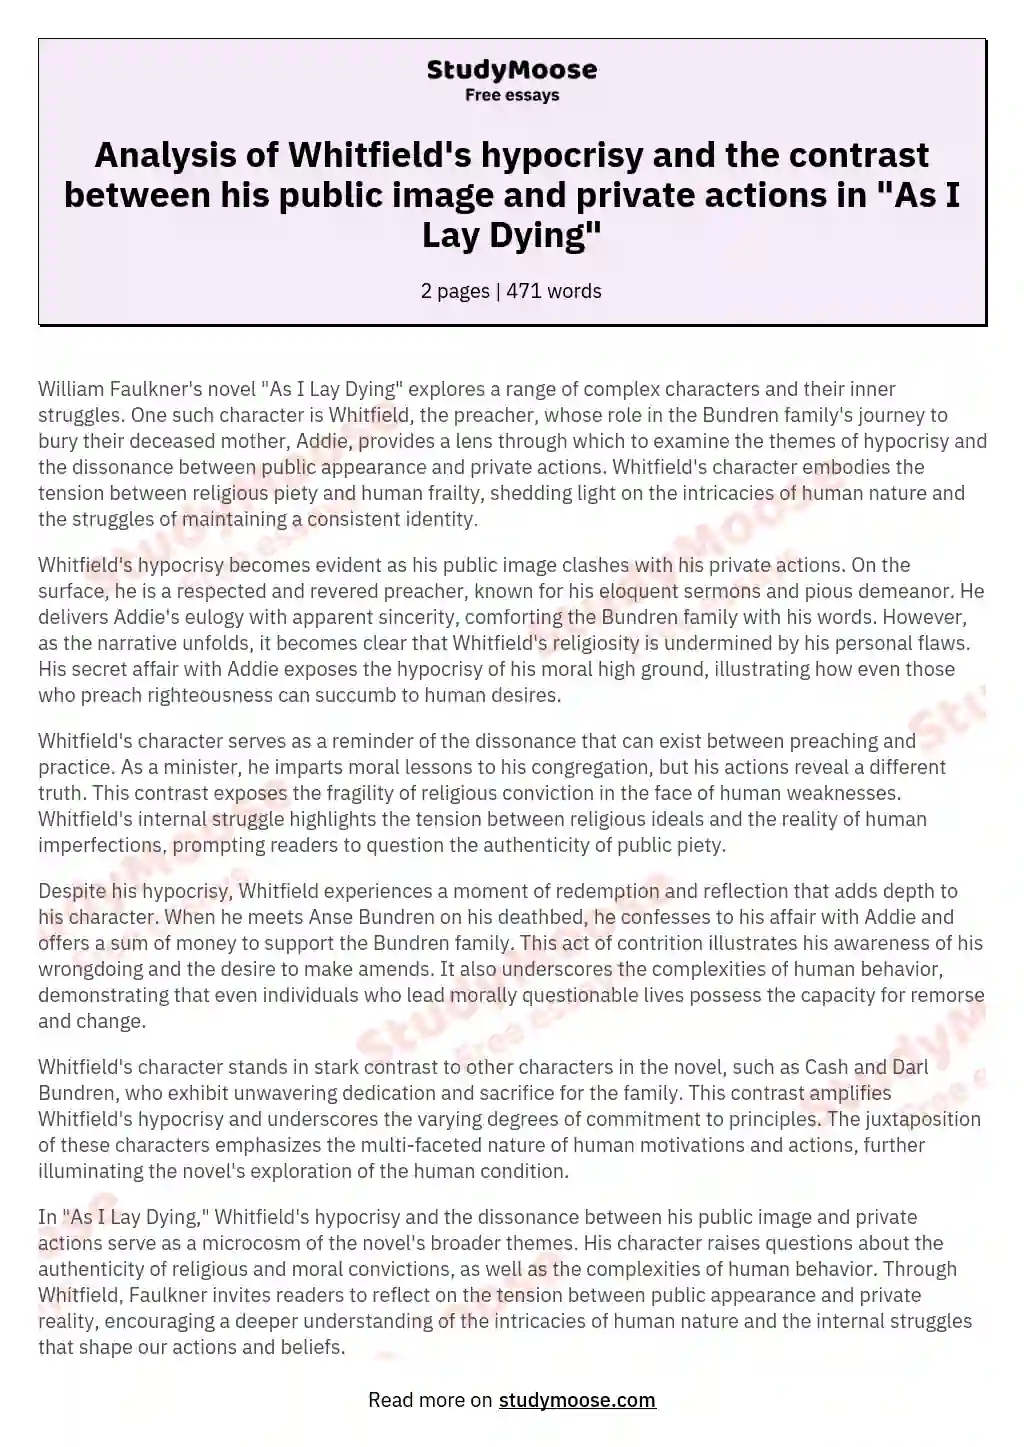 Analysis of Whitfield's hypocrisy and the contrast between his public image and private actions in "As I Lay Dying" essay